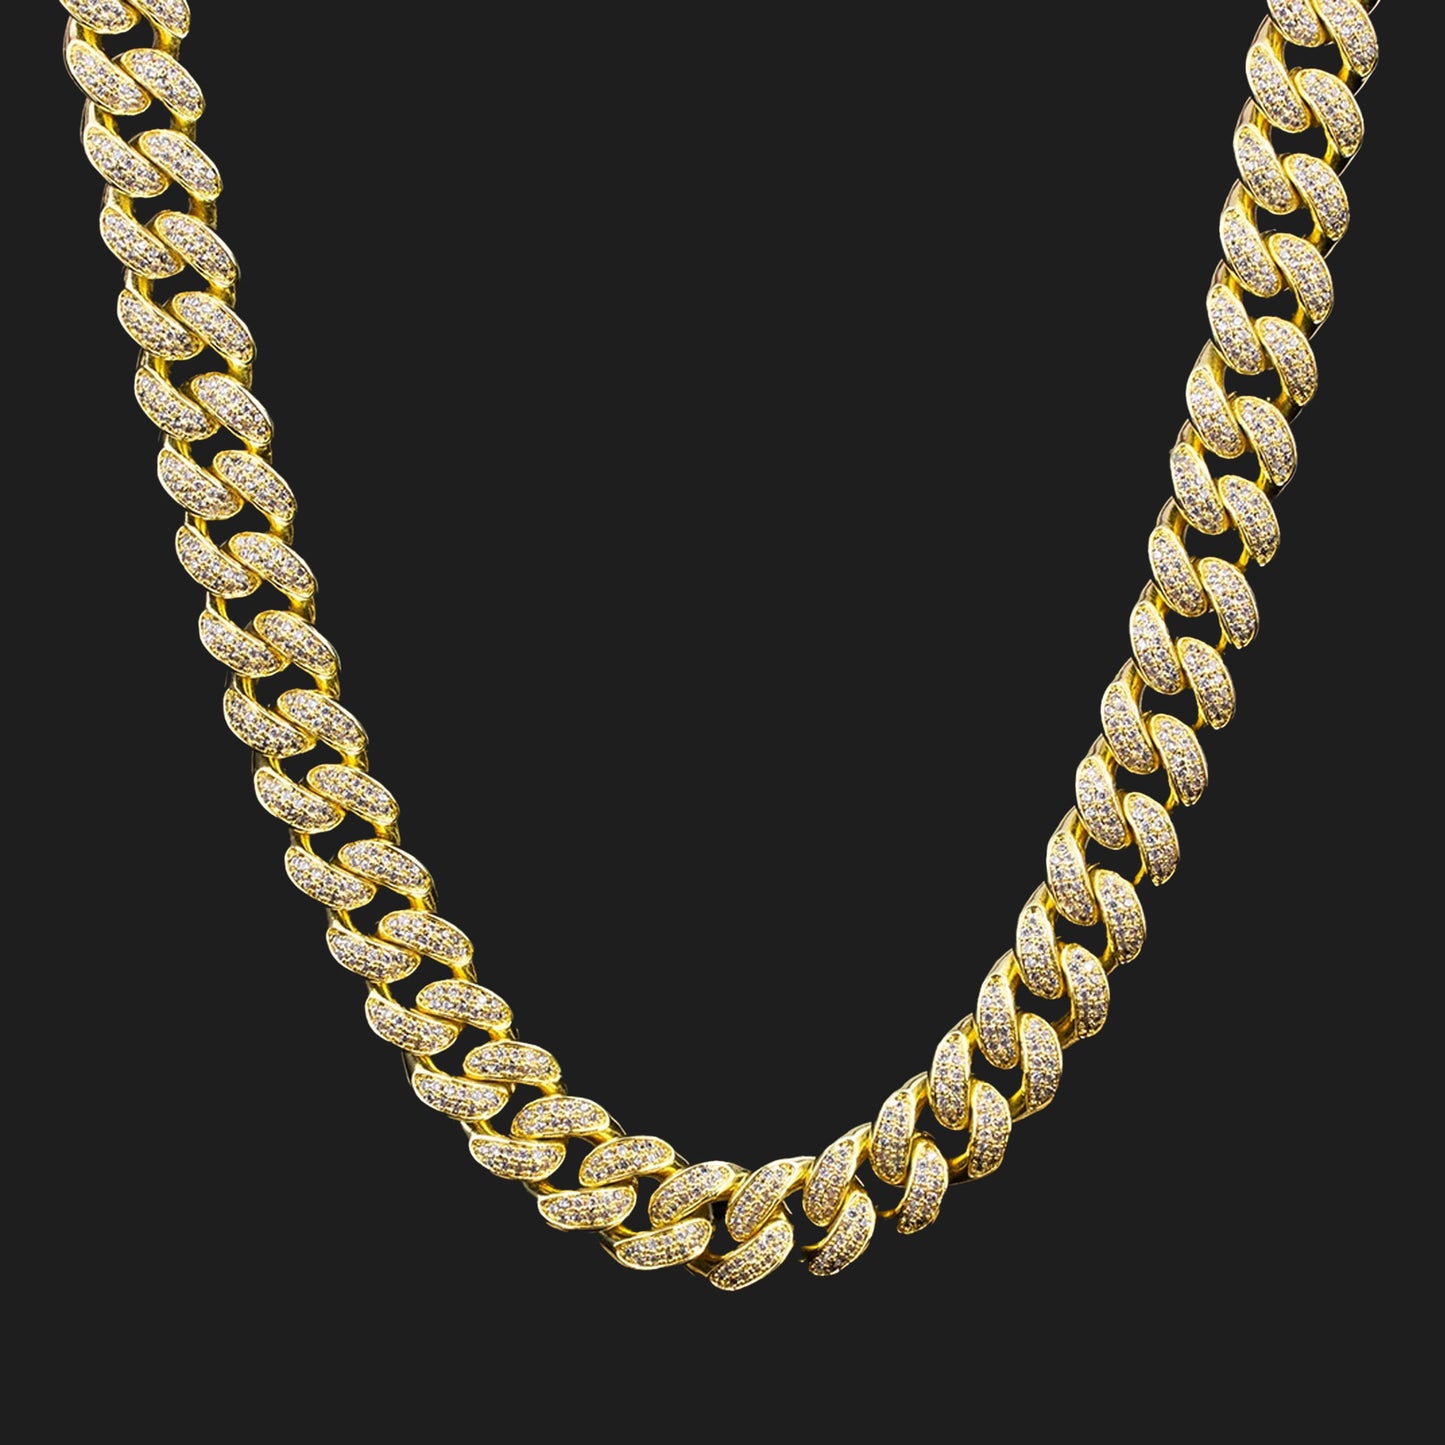 10mm Iced Cuban Link Chain - 18K Gold